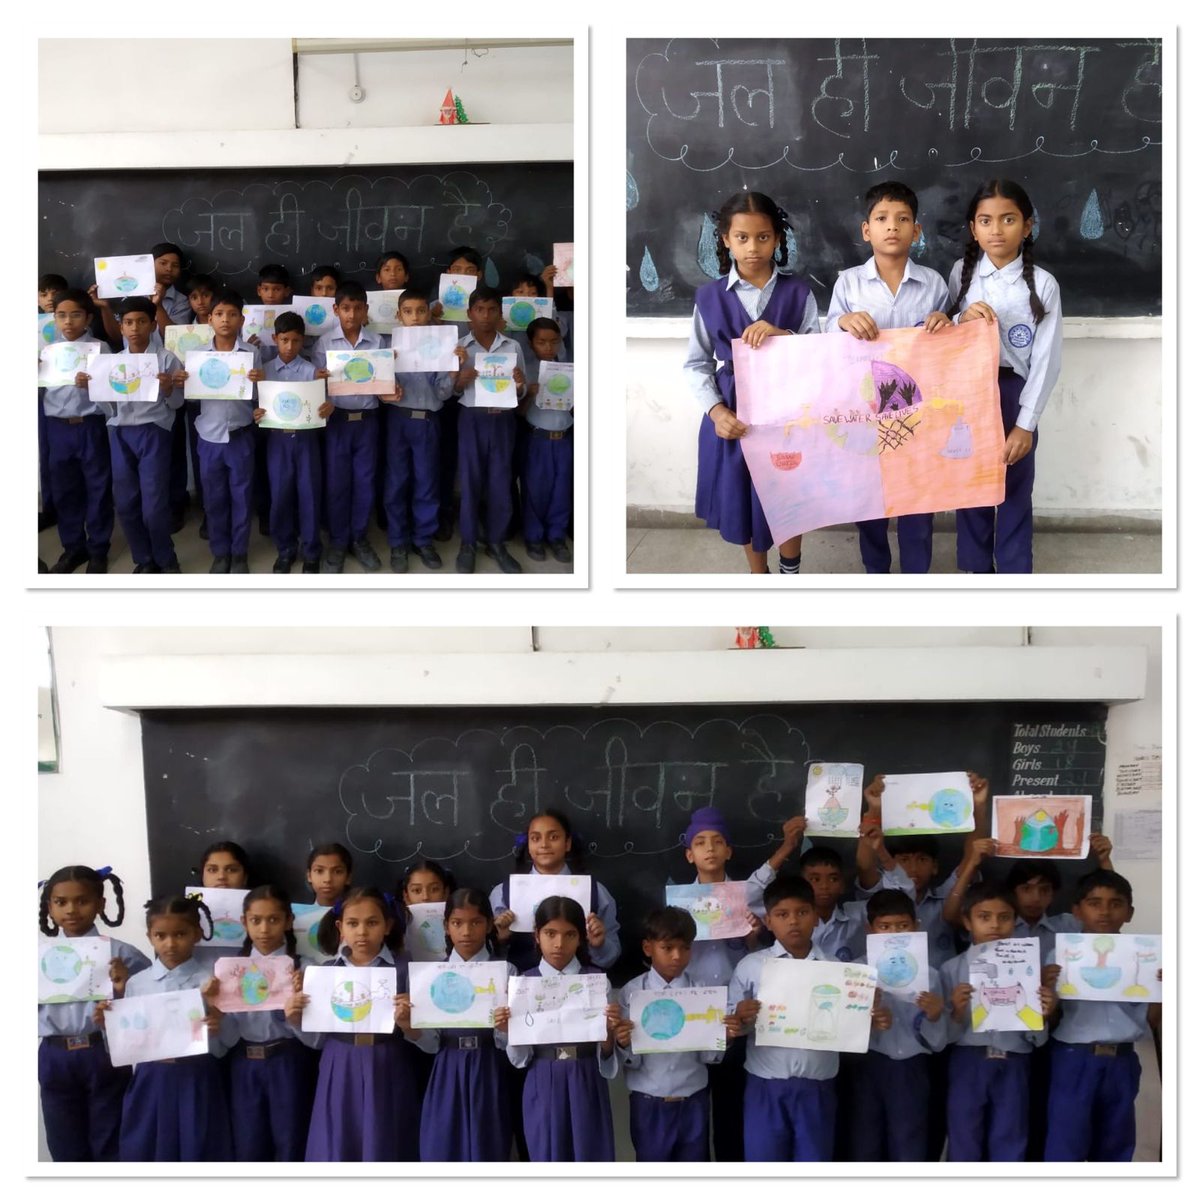 Poster making and Essay writing by students of GHS 53 today under JAL PAKHWADA

@mhrd_innovation @SchoolEduChd @mhrd_innovation